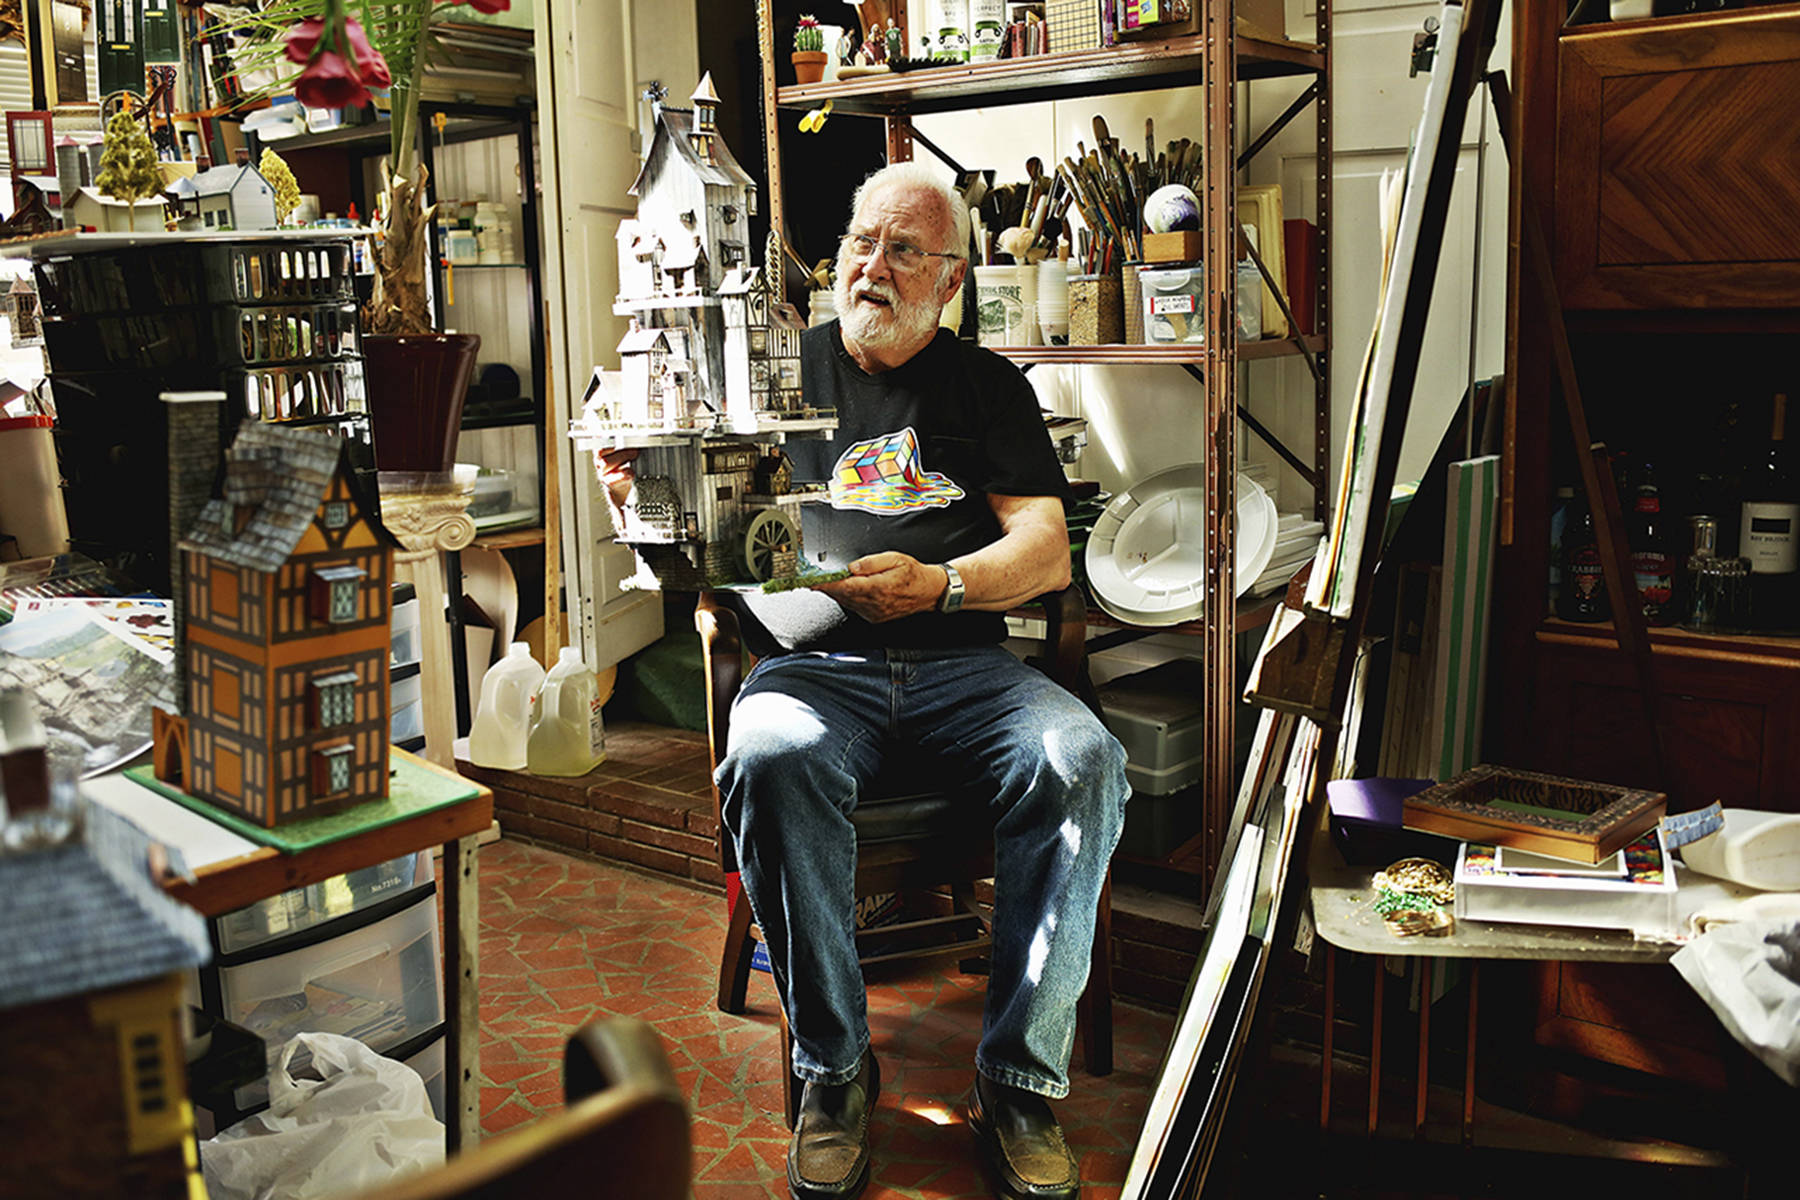 Jim Kellison, 81, sits in his home studio in Raleigh, where he makes his elaborate paper crafts including ornate houses, birds, planes and flowers. (Juli Leonard/Raleigh News & Observer)